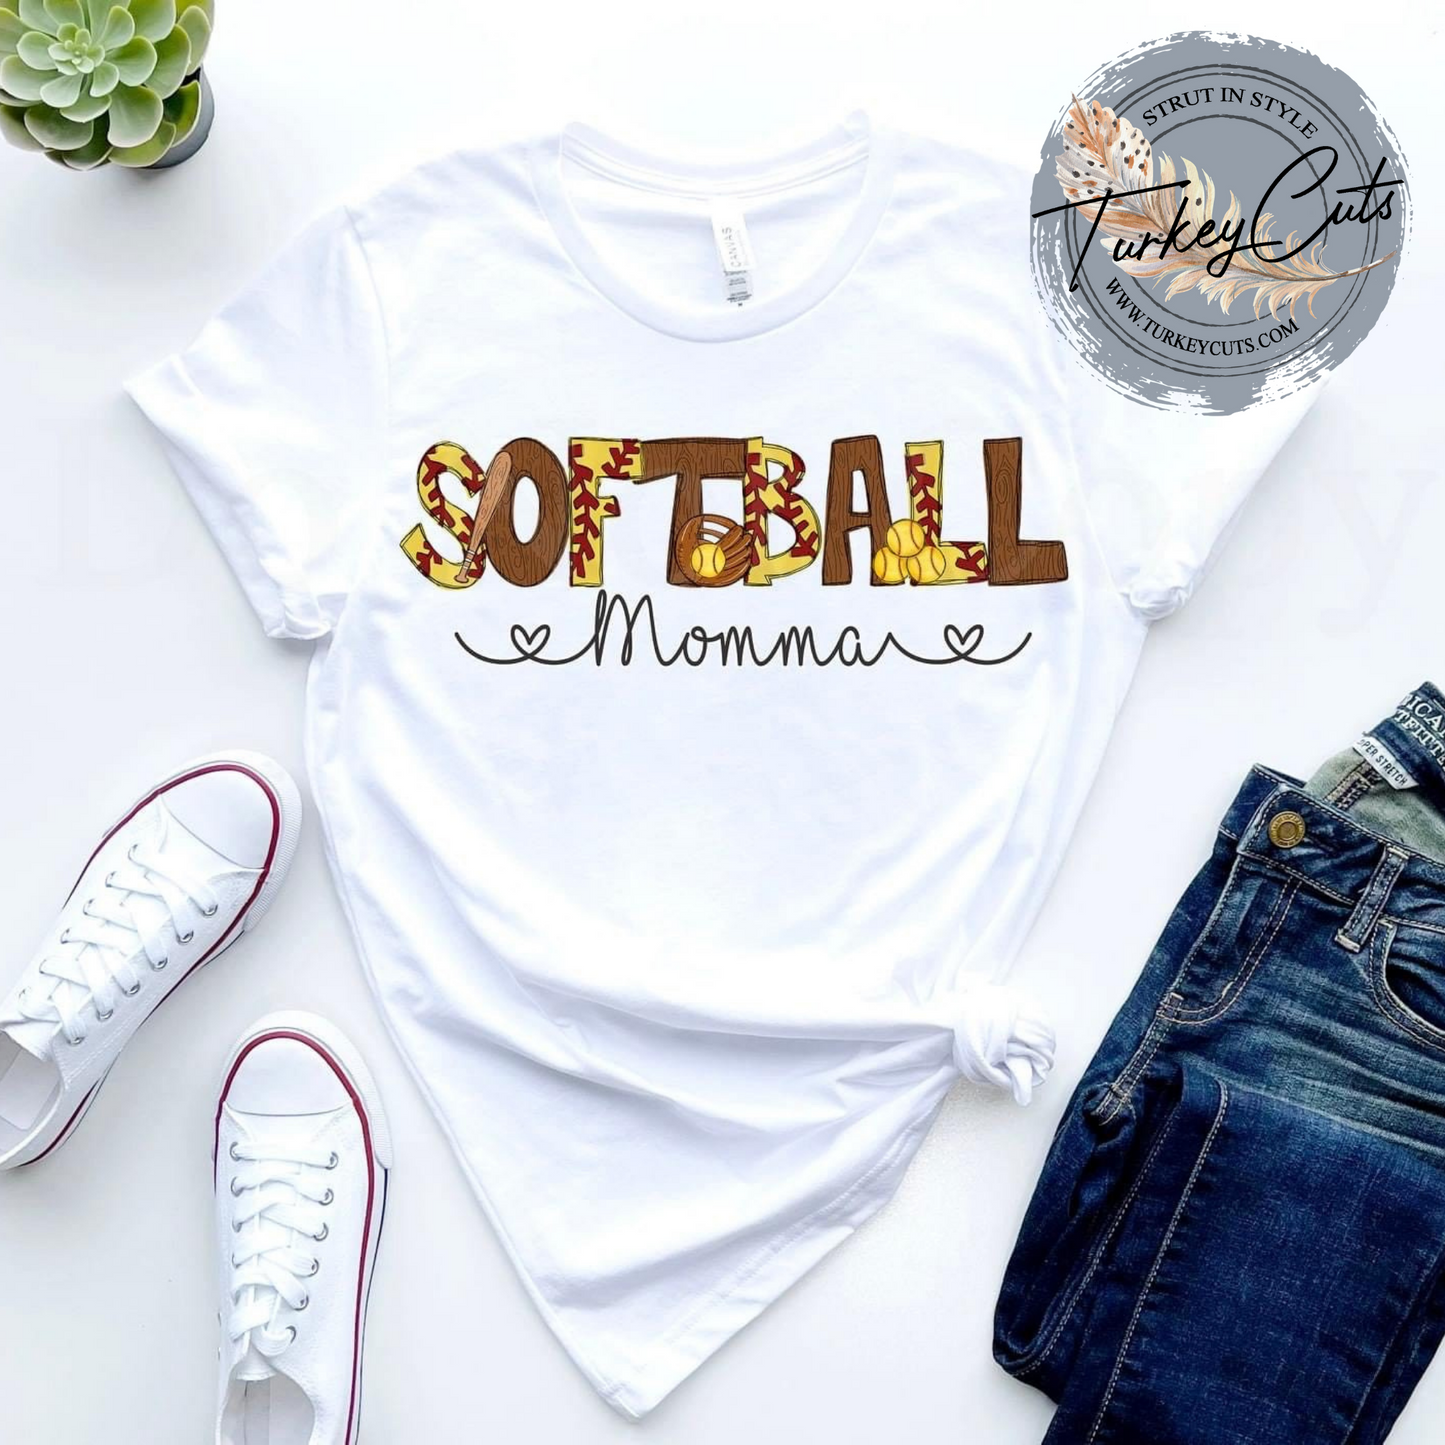 Baseball / Softball (Personalized with any name)